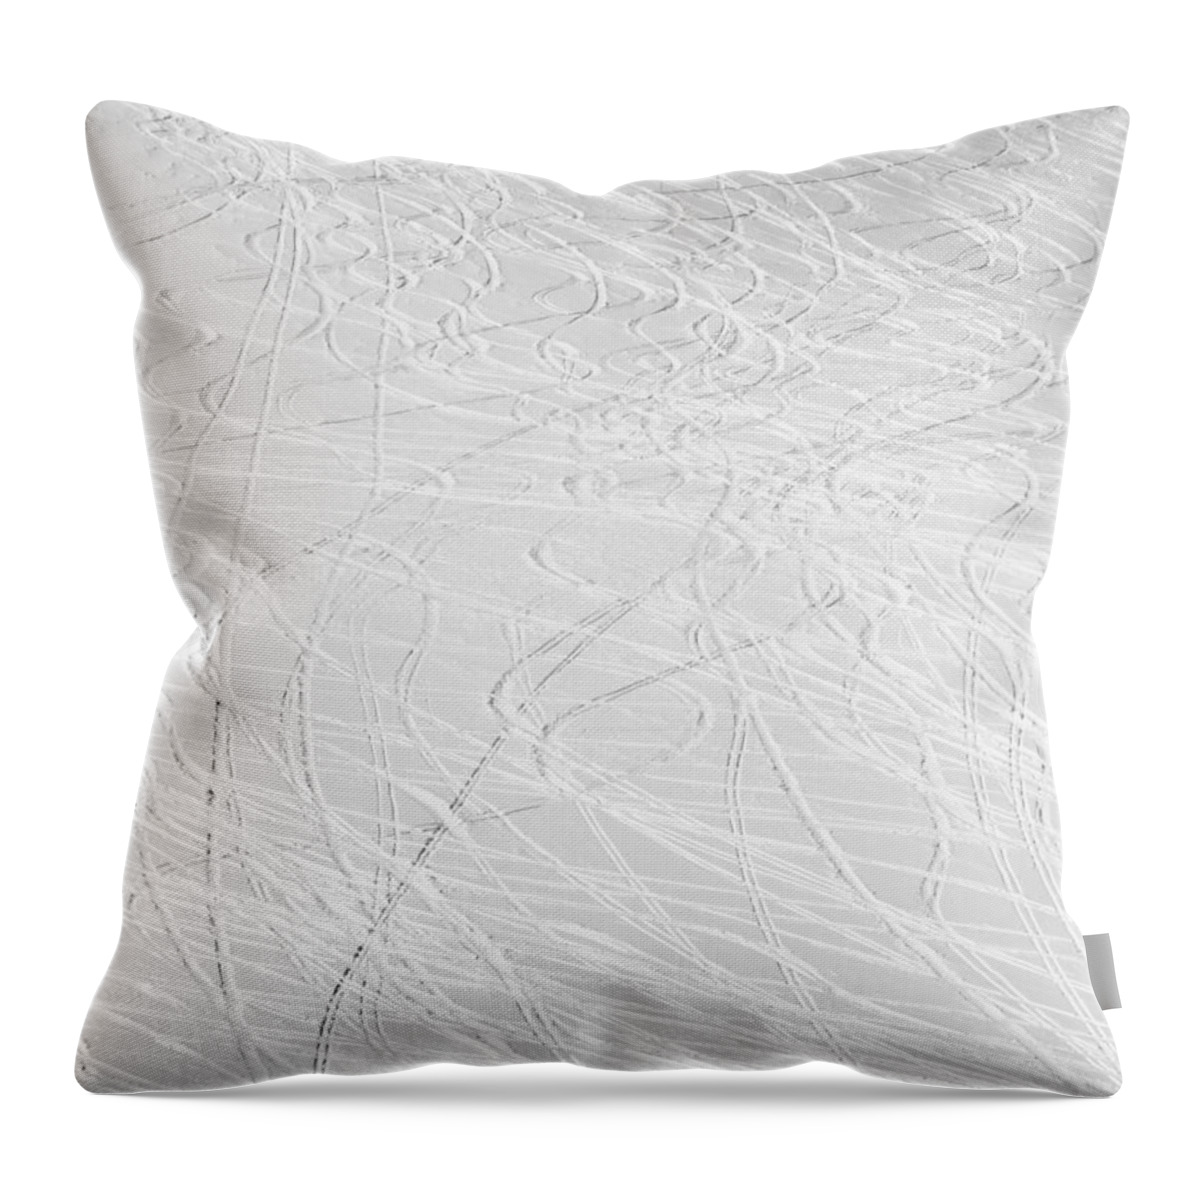 Skiing Throw Pillow featuring the photograph Skier's Abstract by Aaron Spong